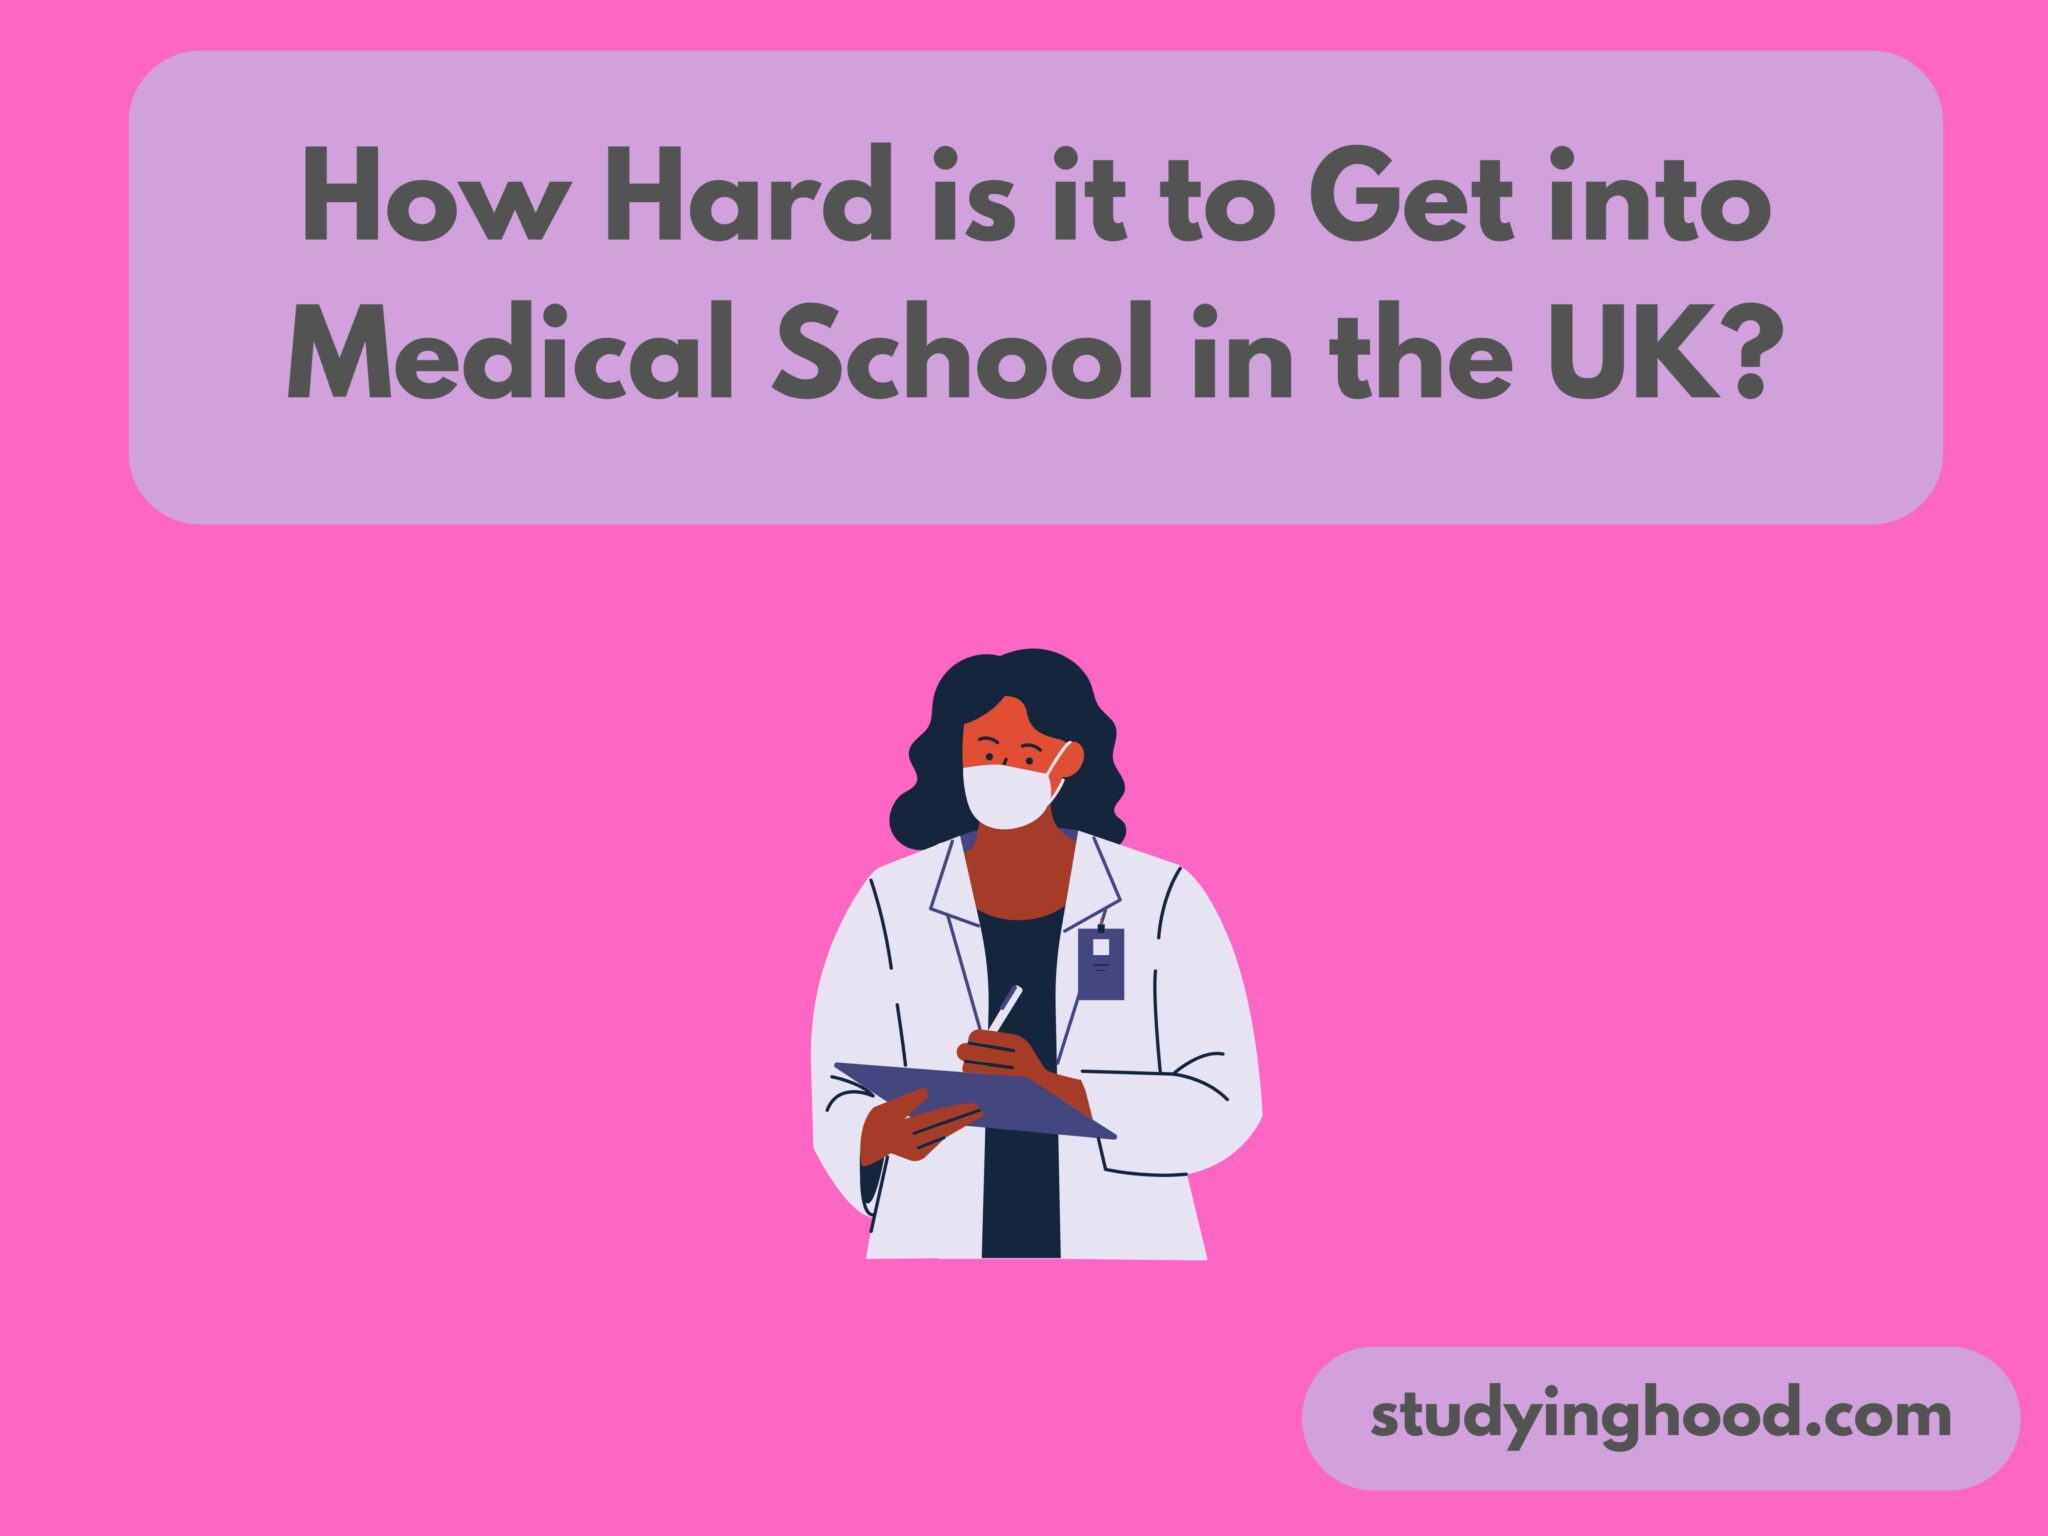 How Hard is it to Get into Medical School in the UK